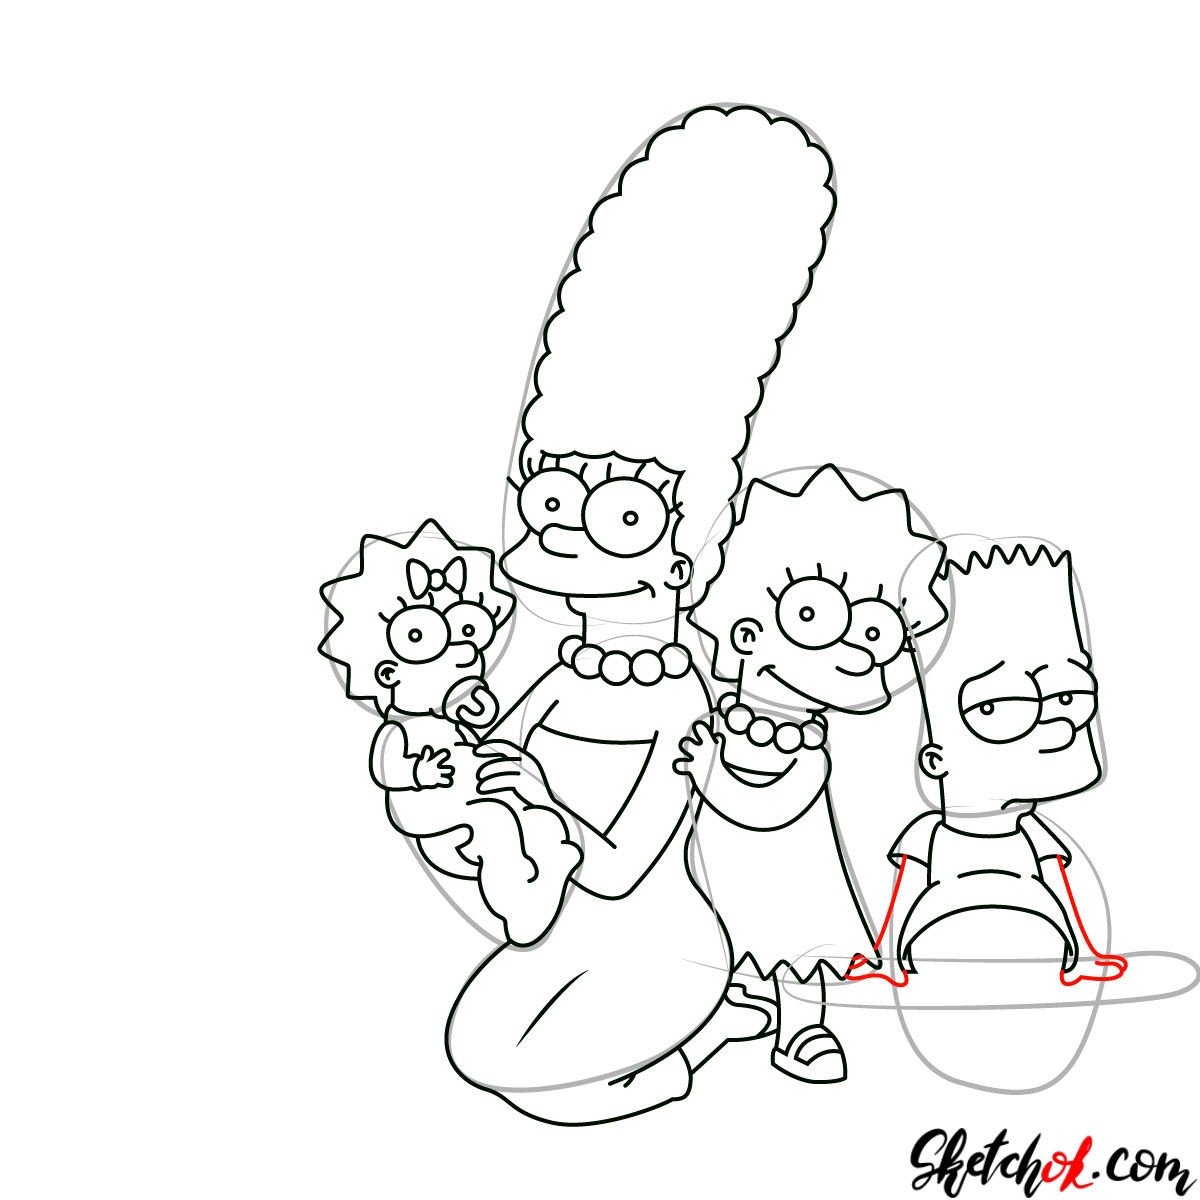 How to draw the Simpsons Family - step 19